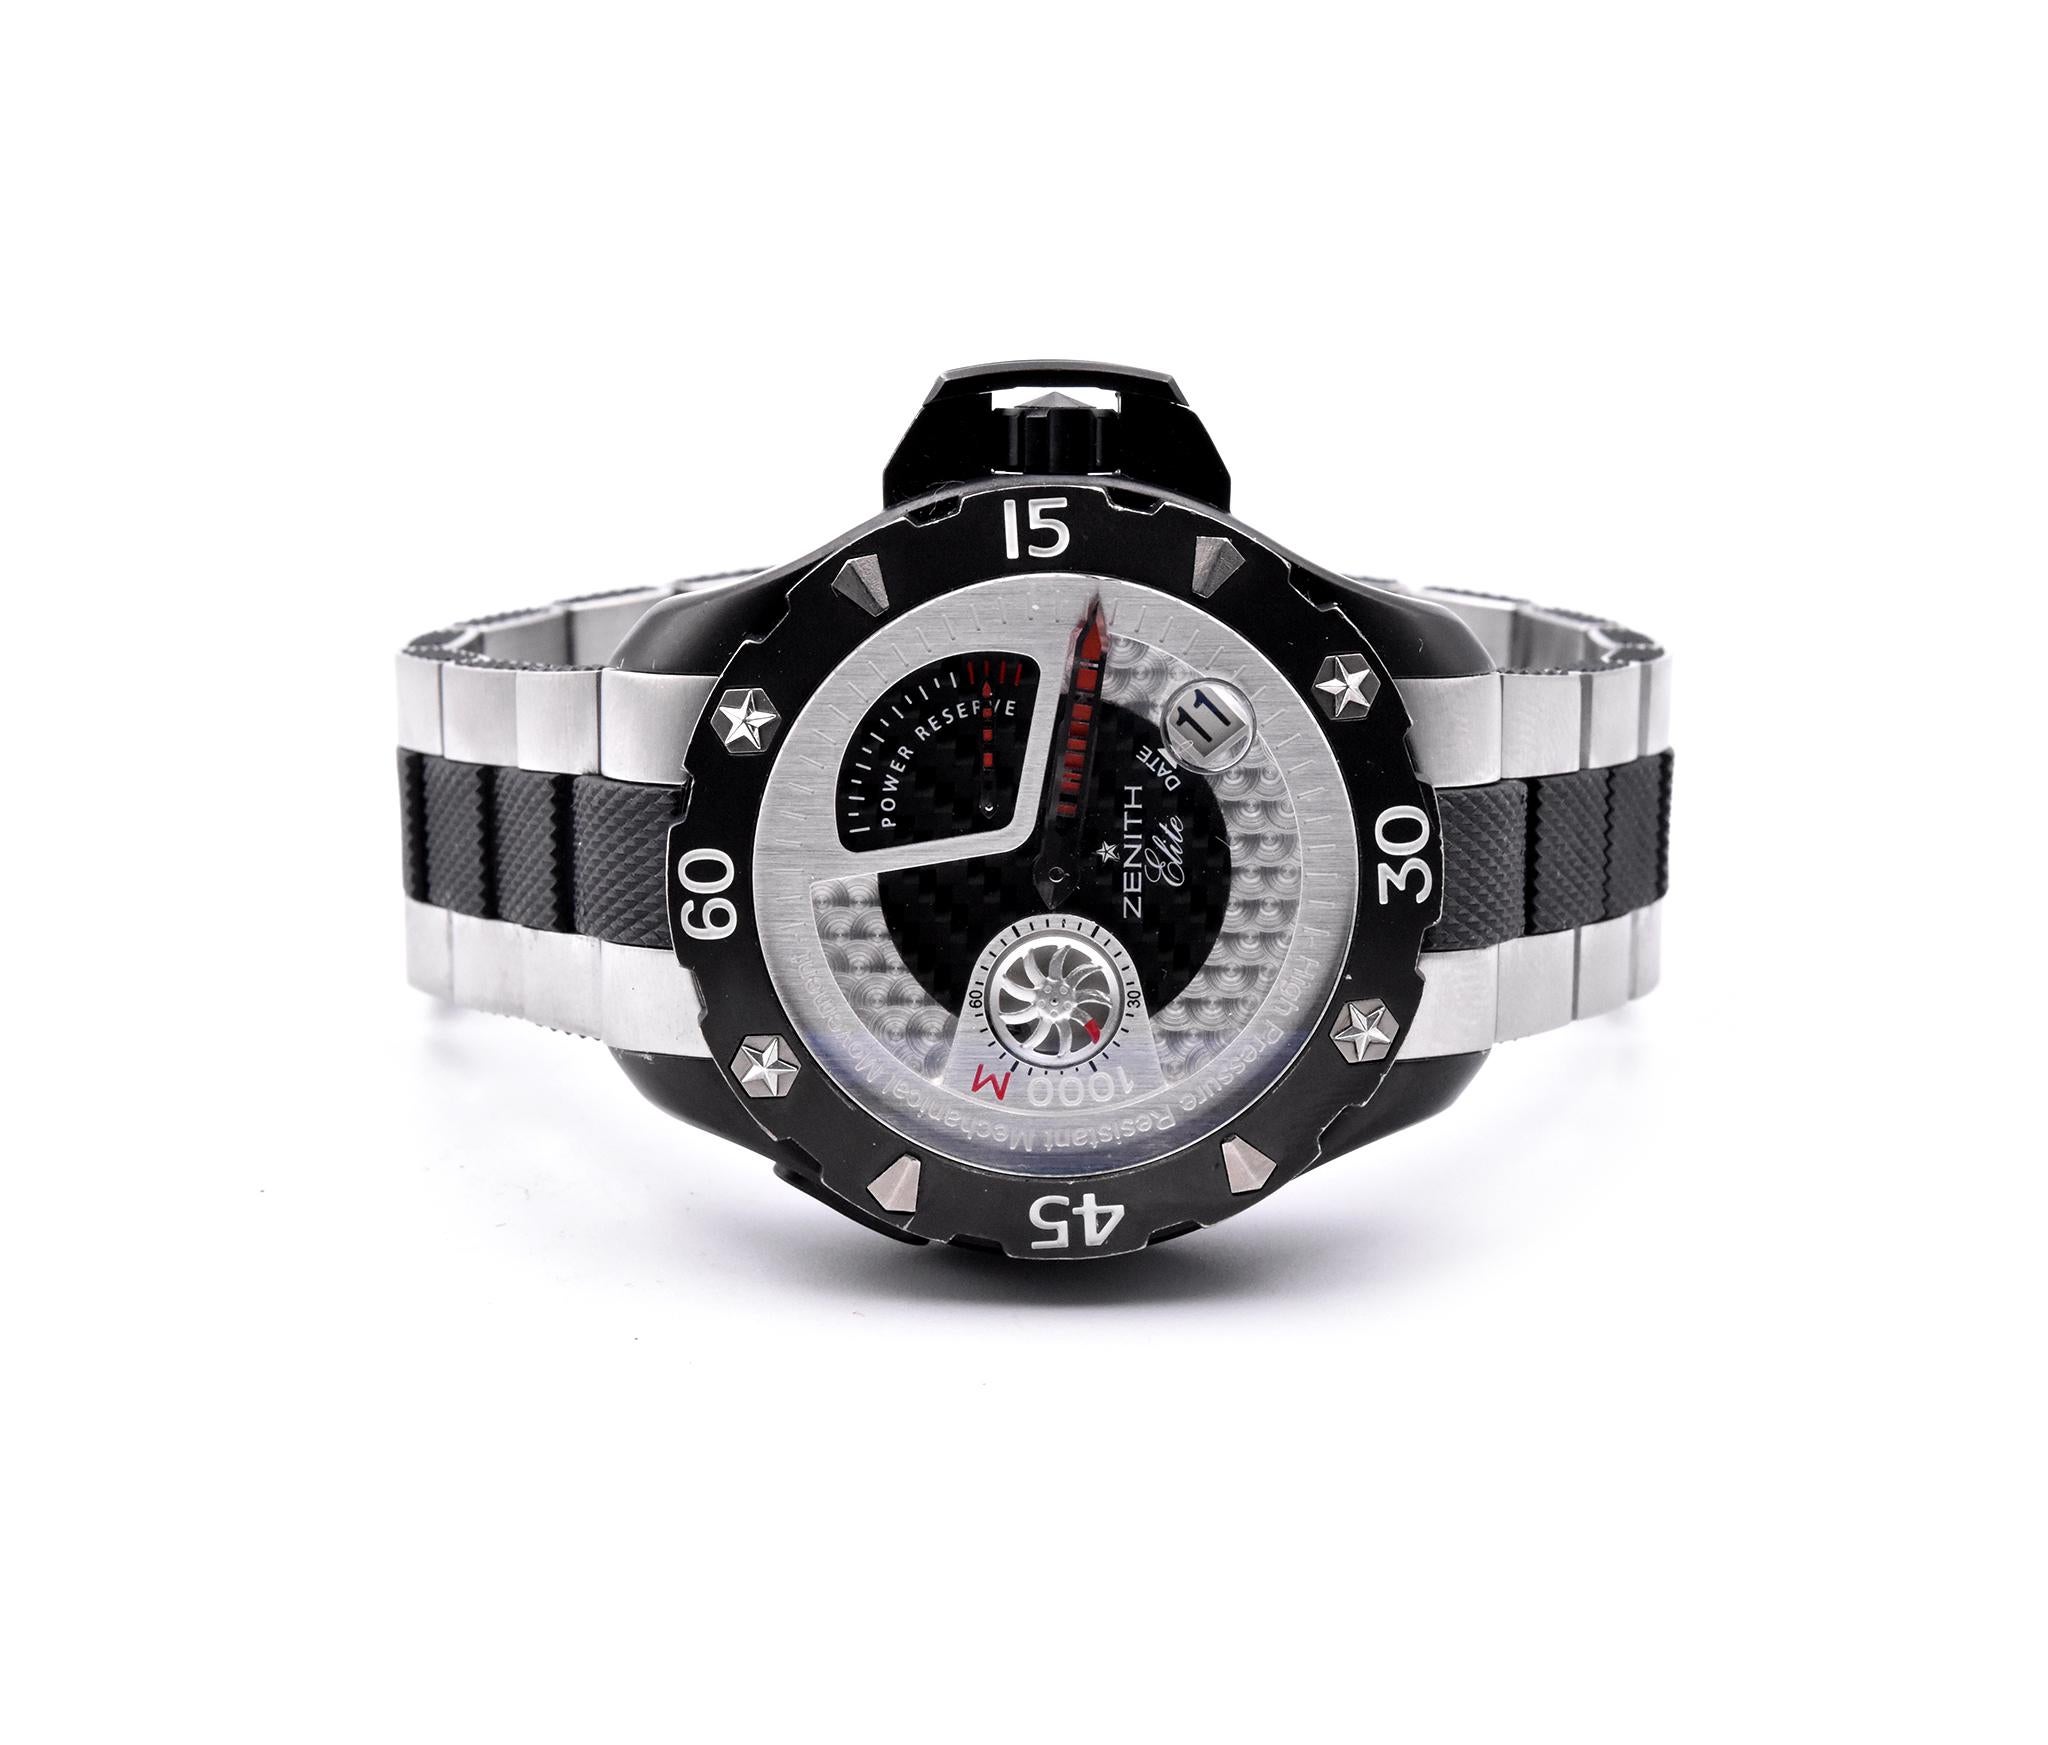 Movement: automatic 
Function: Date, Hour, Minute, Small Second, Power Reserved 
Case: 4mm titanium case, sapphire crystal, screw-down crown, waterproof to 1000 meters
Band: two tone (black, grey) titanium bracelet
Dial: silver carbon dial, Minute